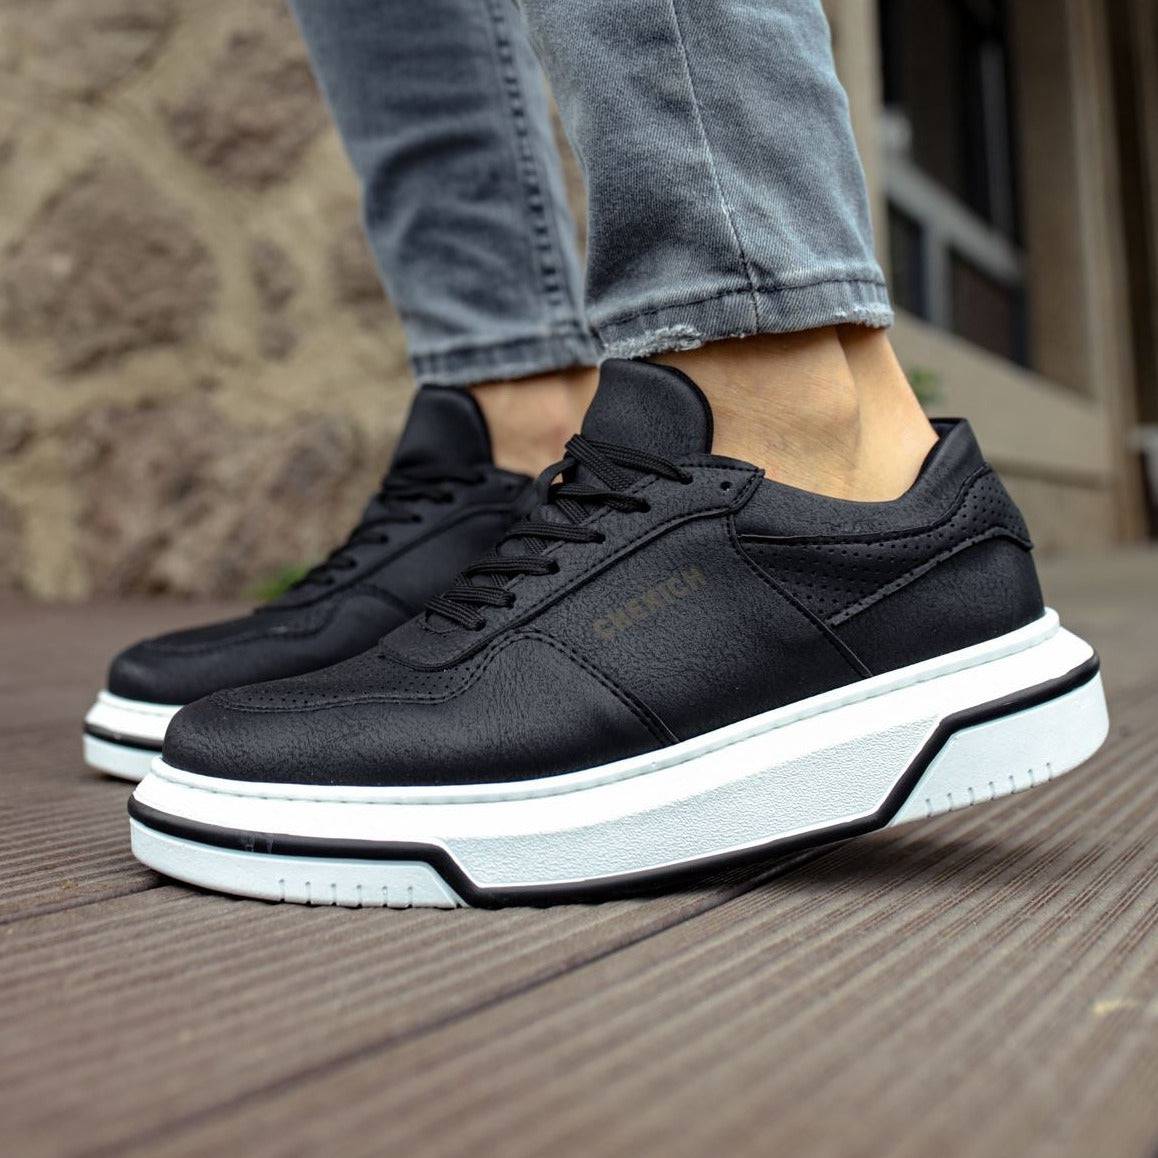 Casual Men's Sneakers by Aapollo | Siena in Black & White